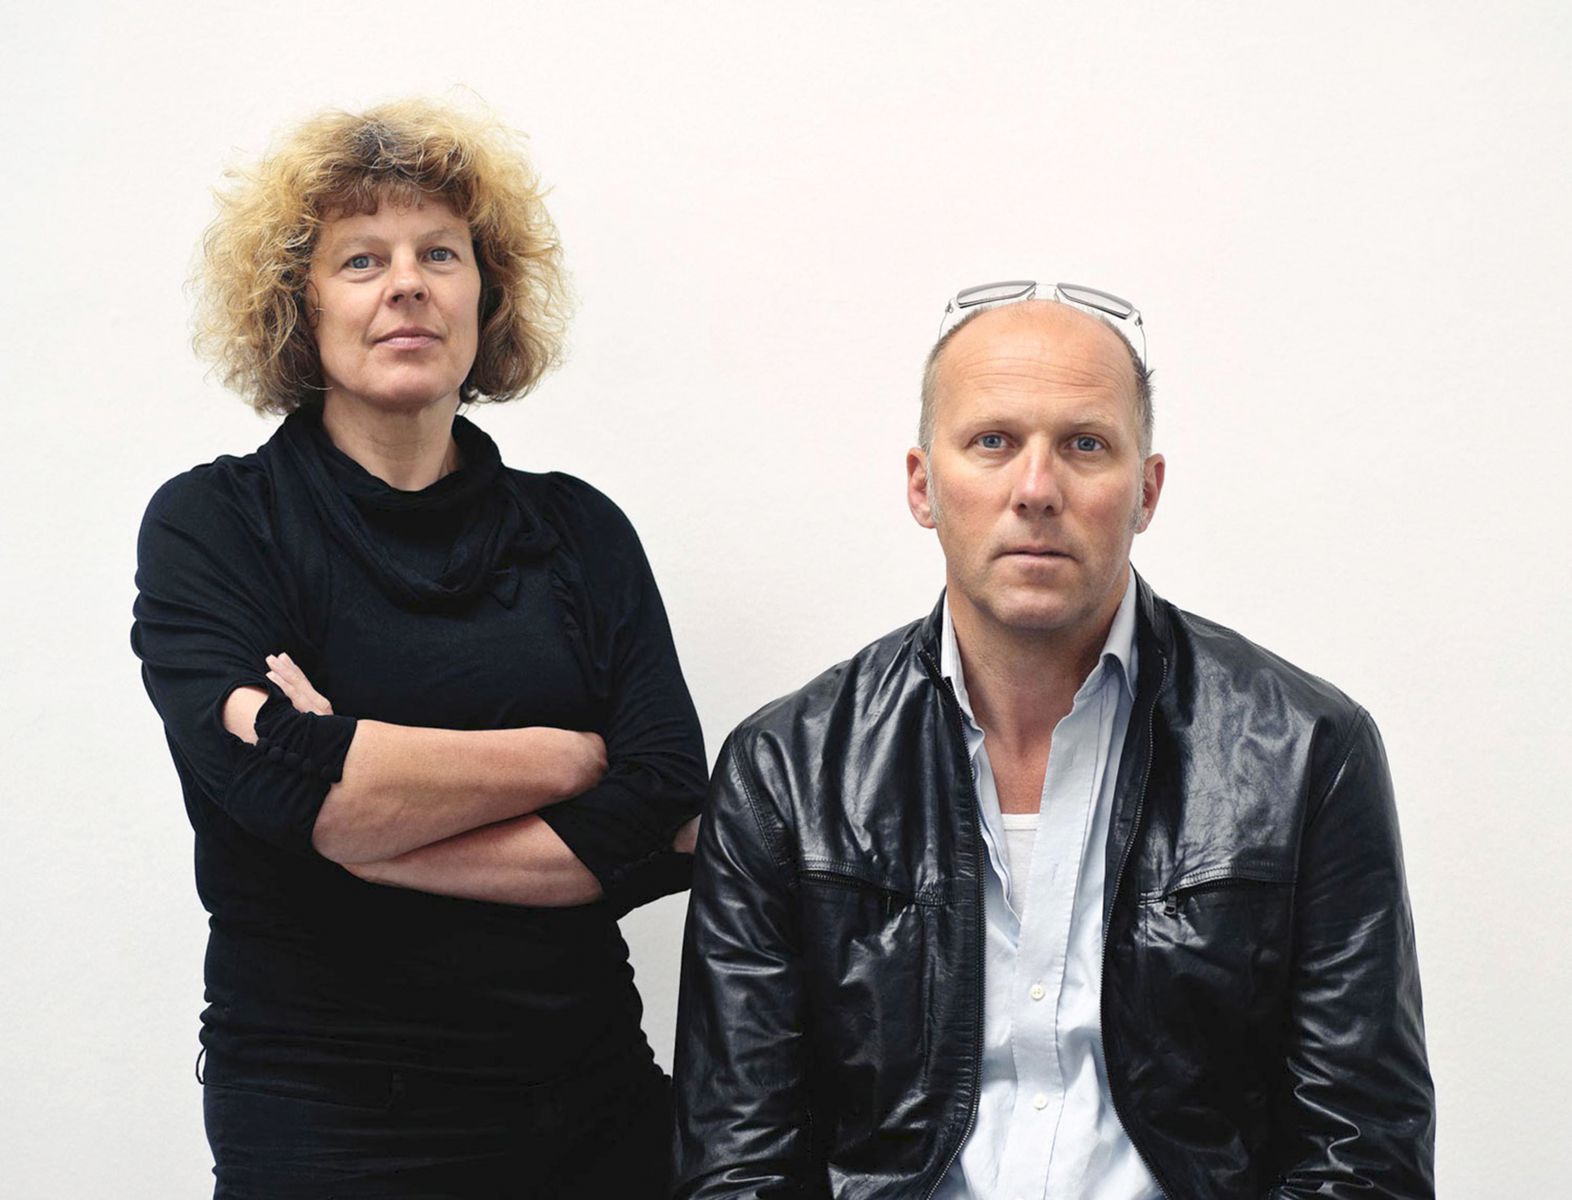 A man and a woman standing against a white background